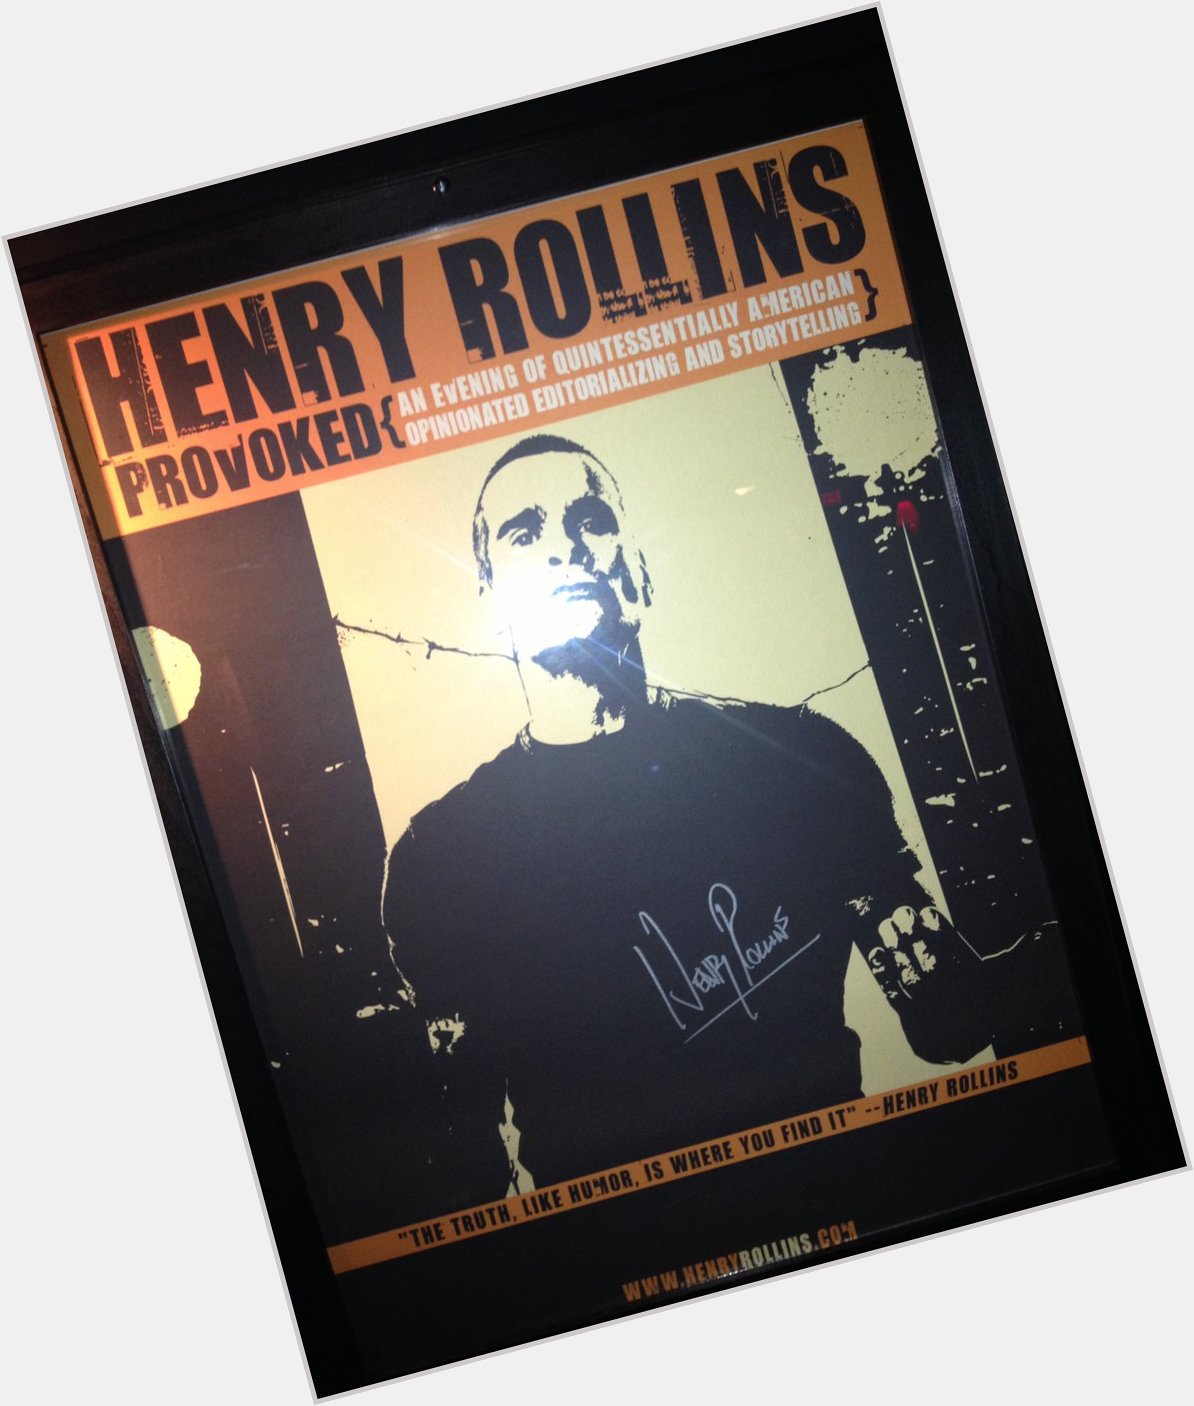 Happy Birthday Henry Rollins! This signed frame poster from his last Fresno show hangs proudly in our bar. 